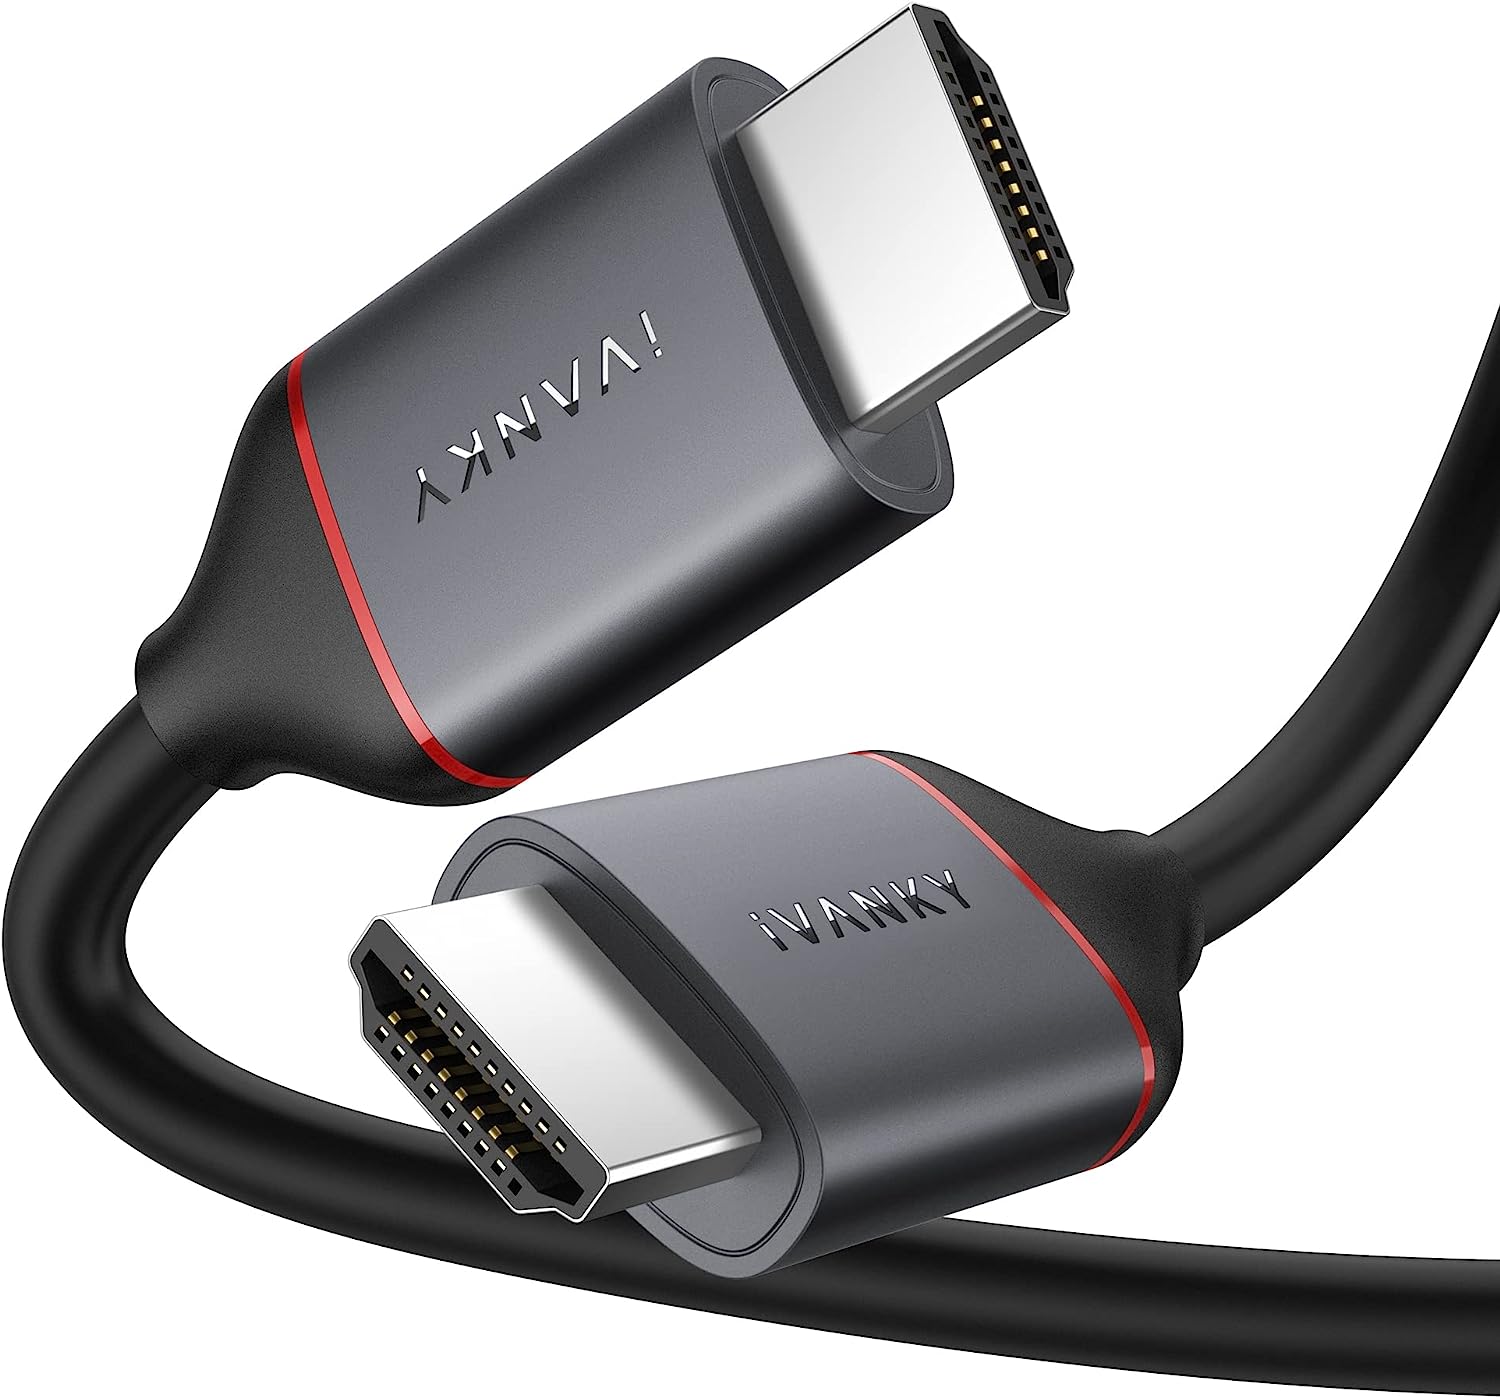 IVANKY 4K HDMI to HDMI Cable 6ft, 18Gbps High Speed [...]